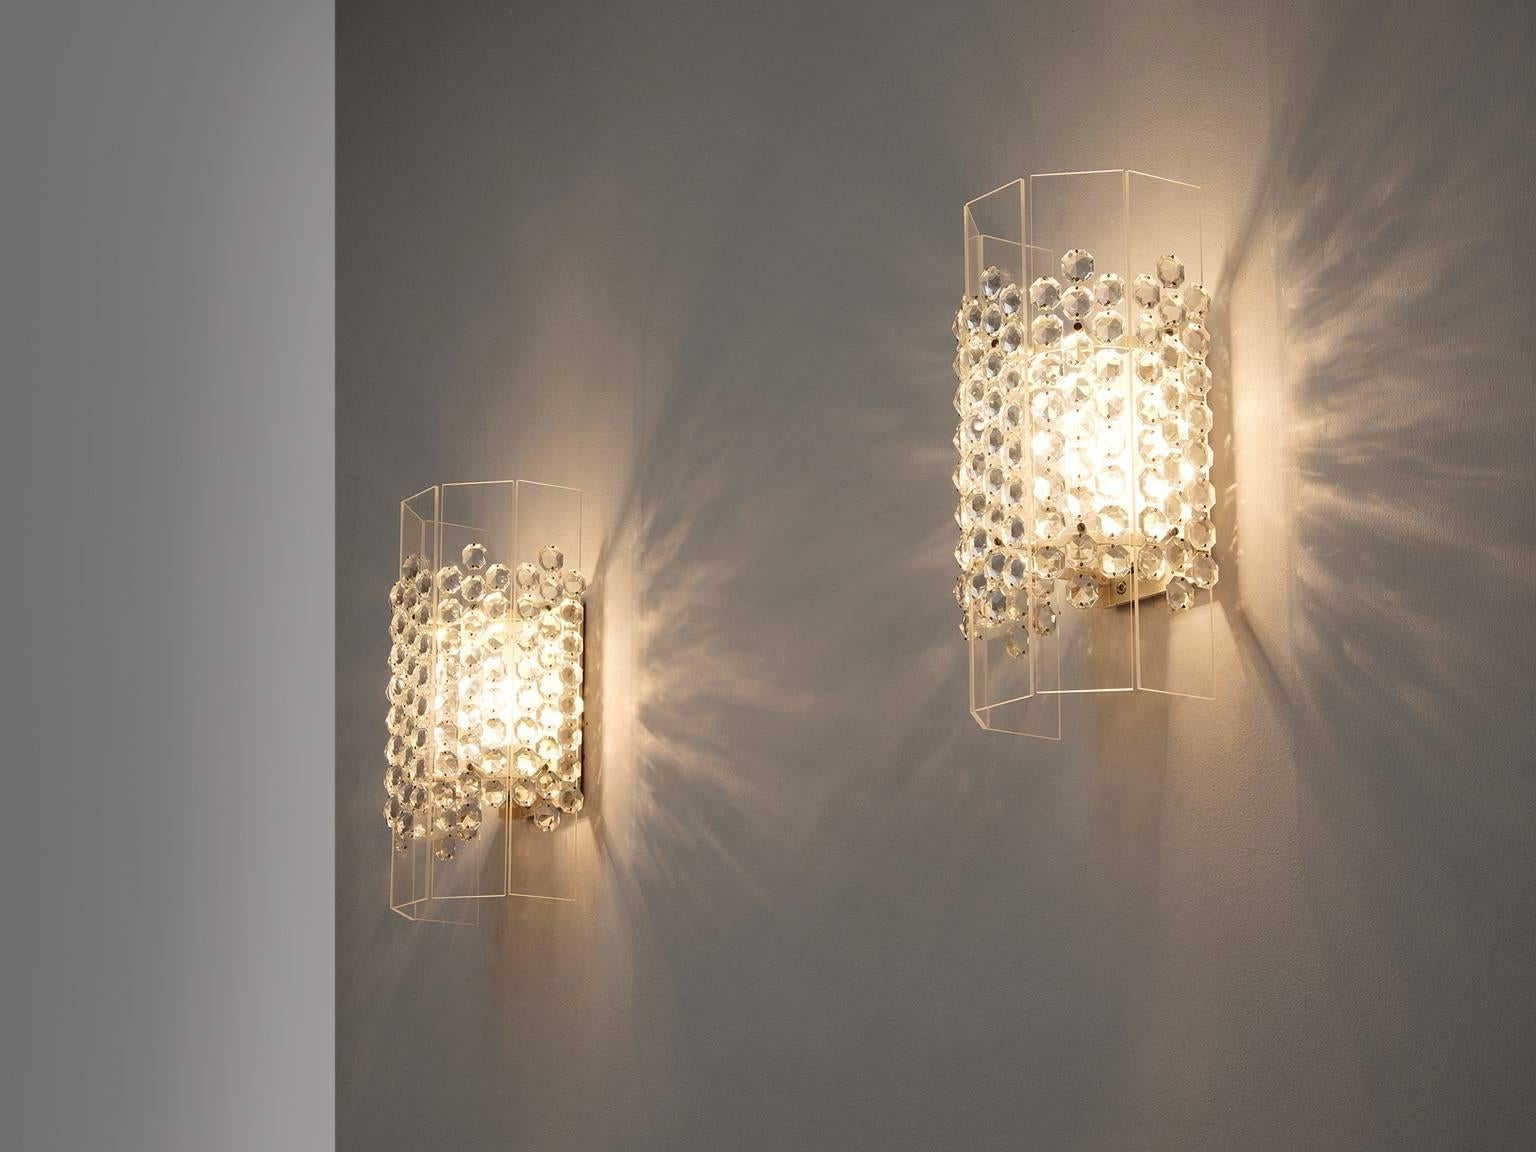 Set of 2 wall lights, Perspex and glass, Germany, 1975. 

A pair of shimmering sconces. These lights have a real simplified design and occur. Due the glass diamonds on the shade they get a stunning appearance. The transparent shade make sure the